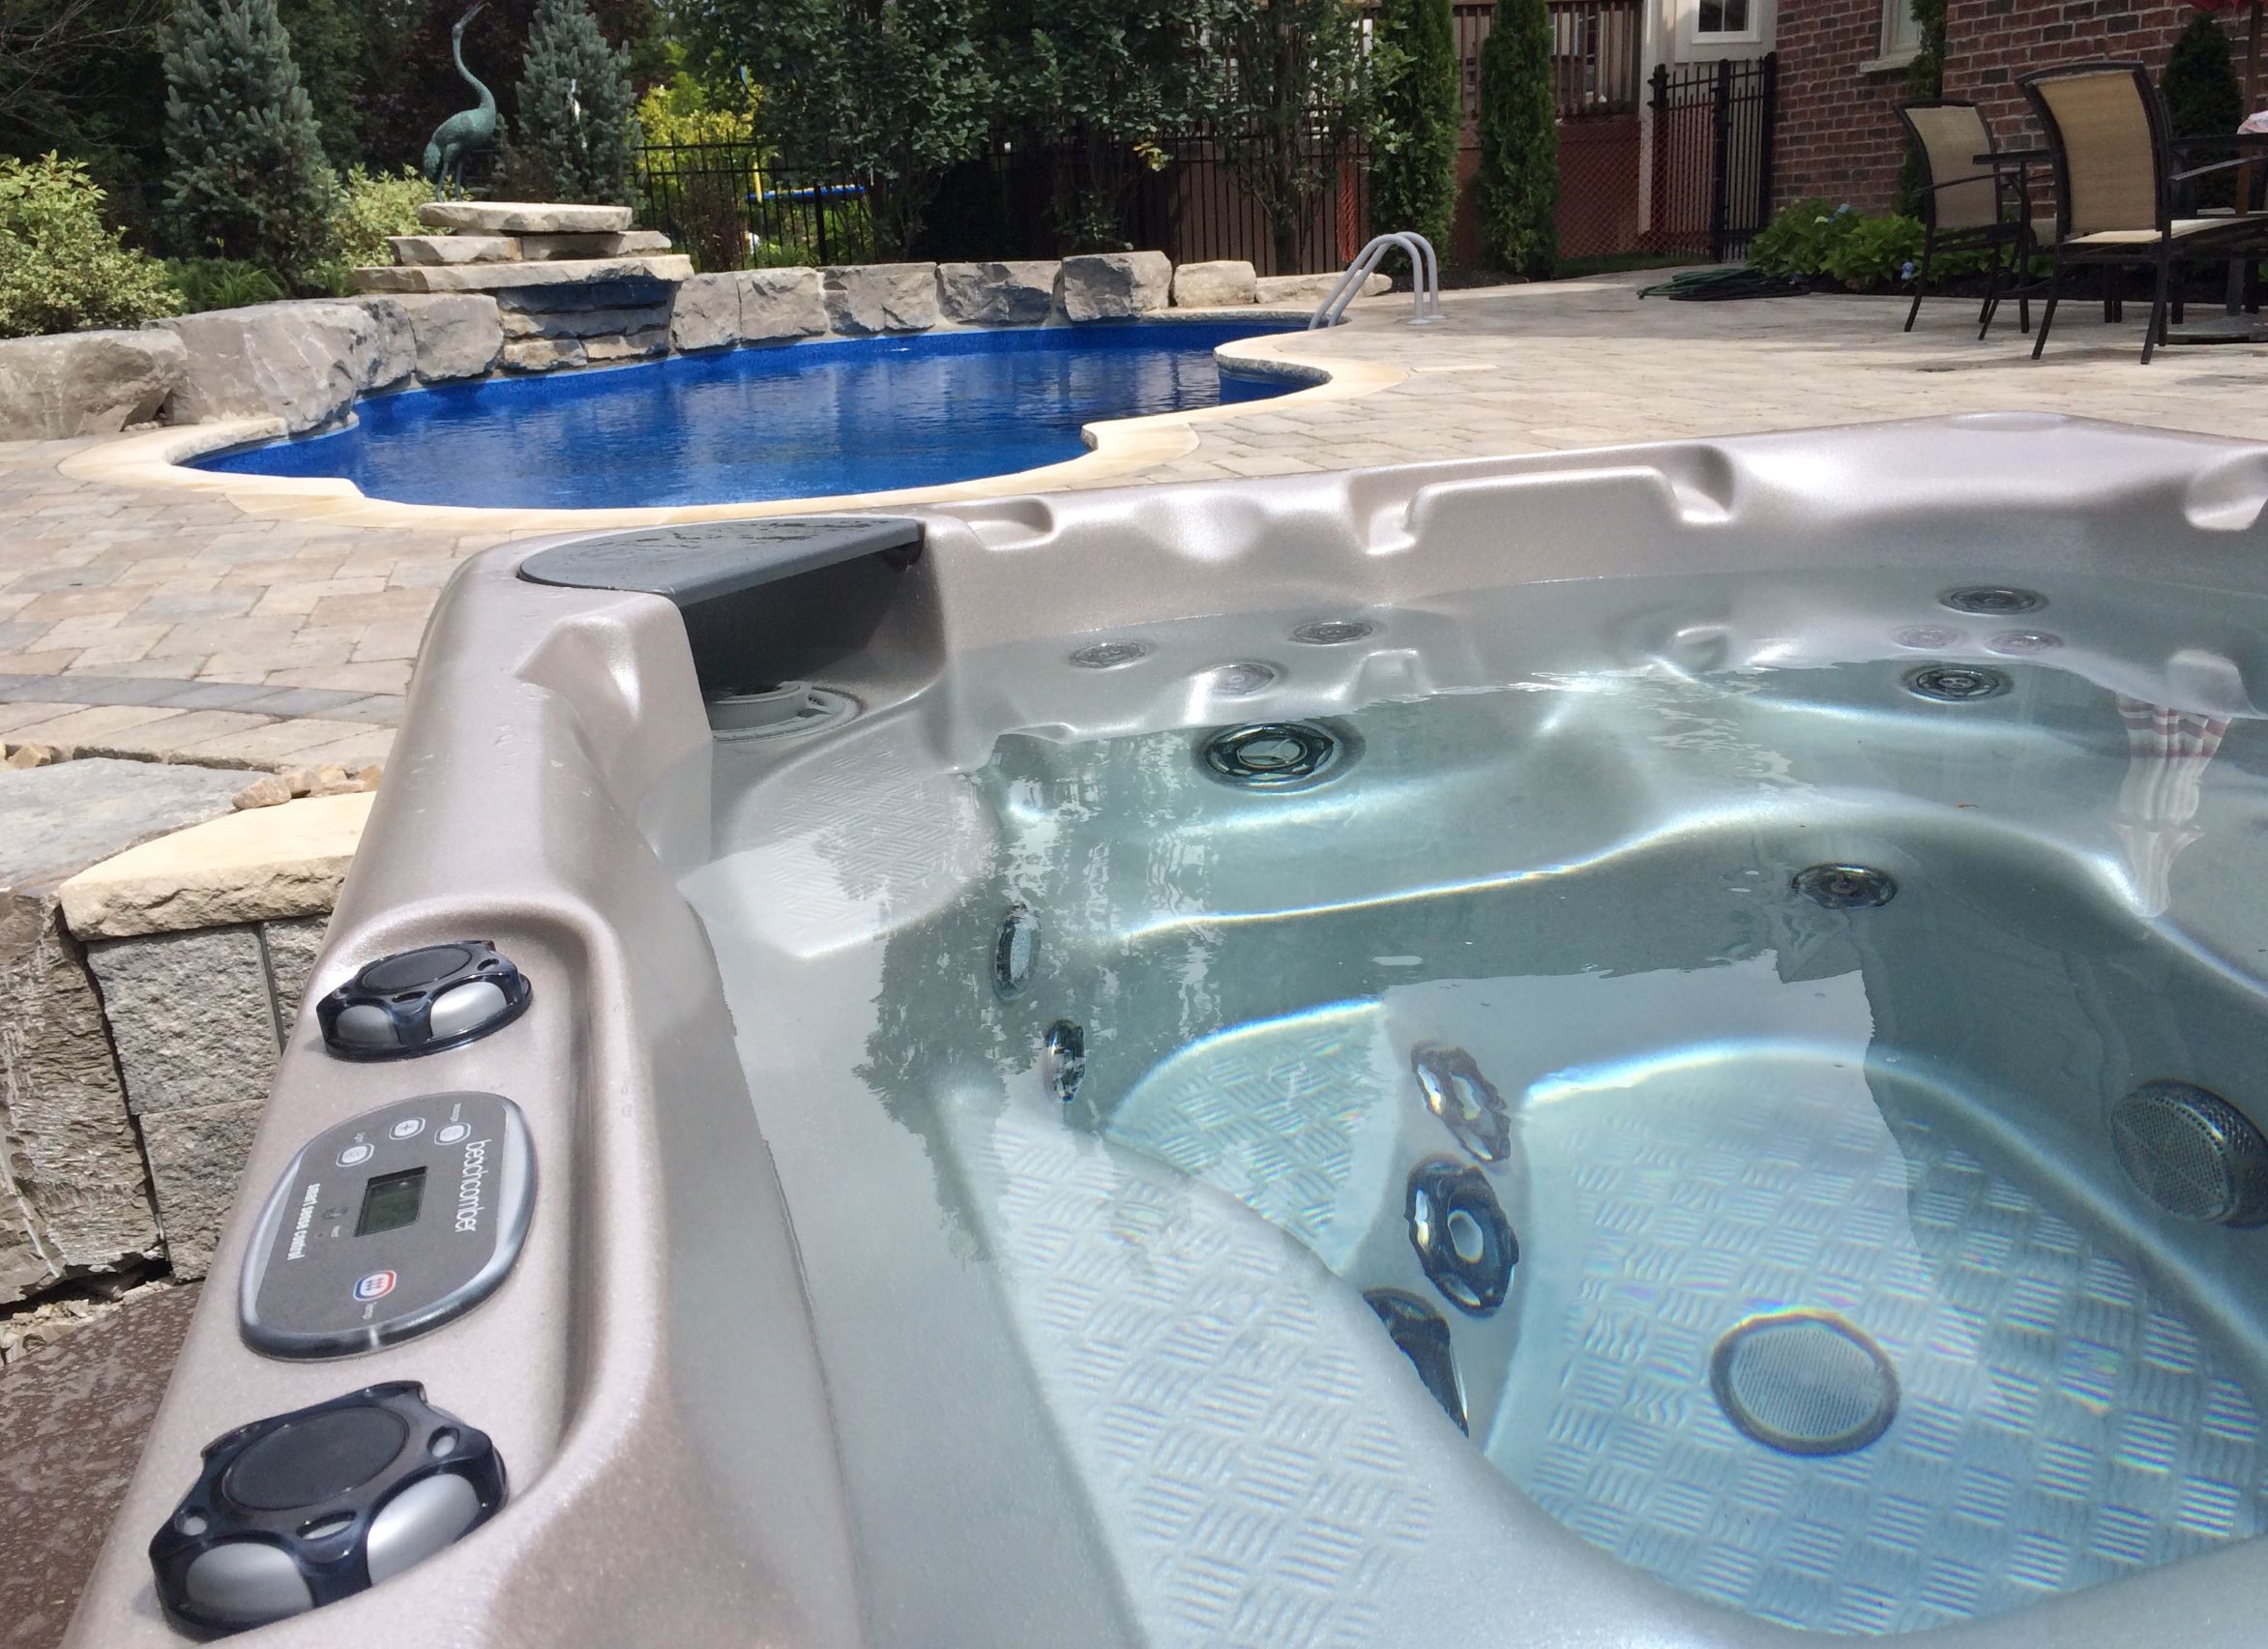 Pool vs Hot Tub: Which One is For You